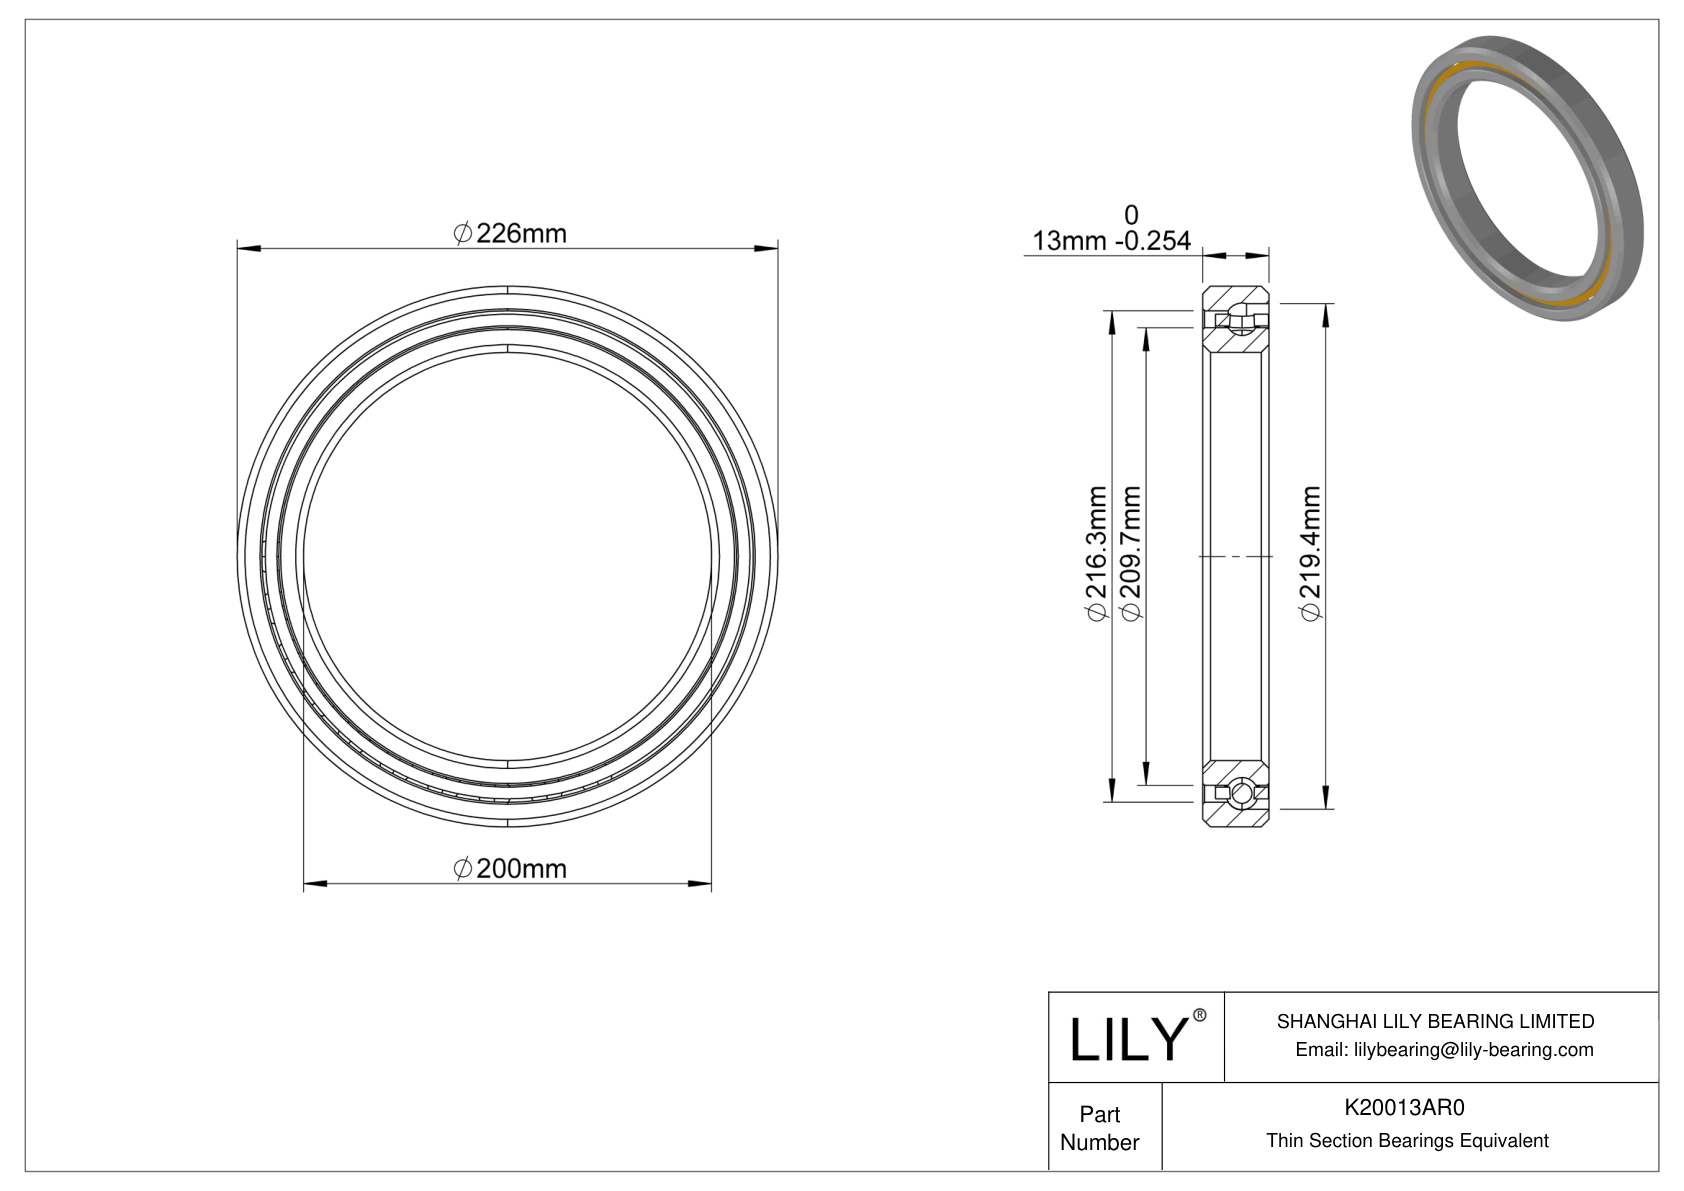 K20013AR0 Constant Section (CS) Bearings cad drawing